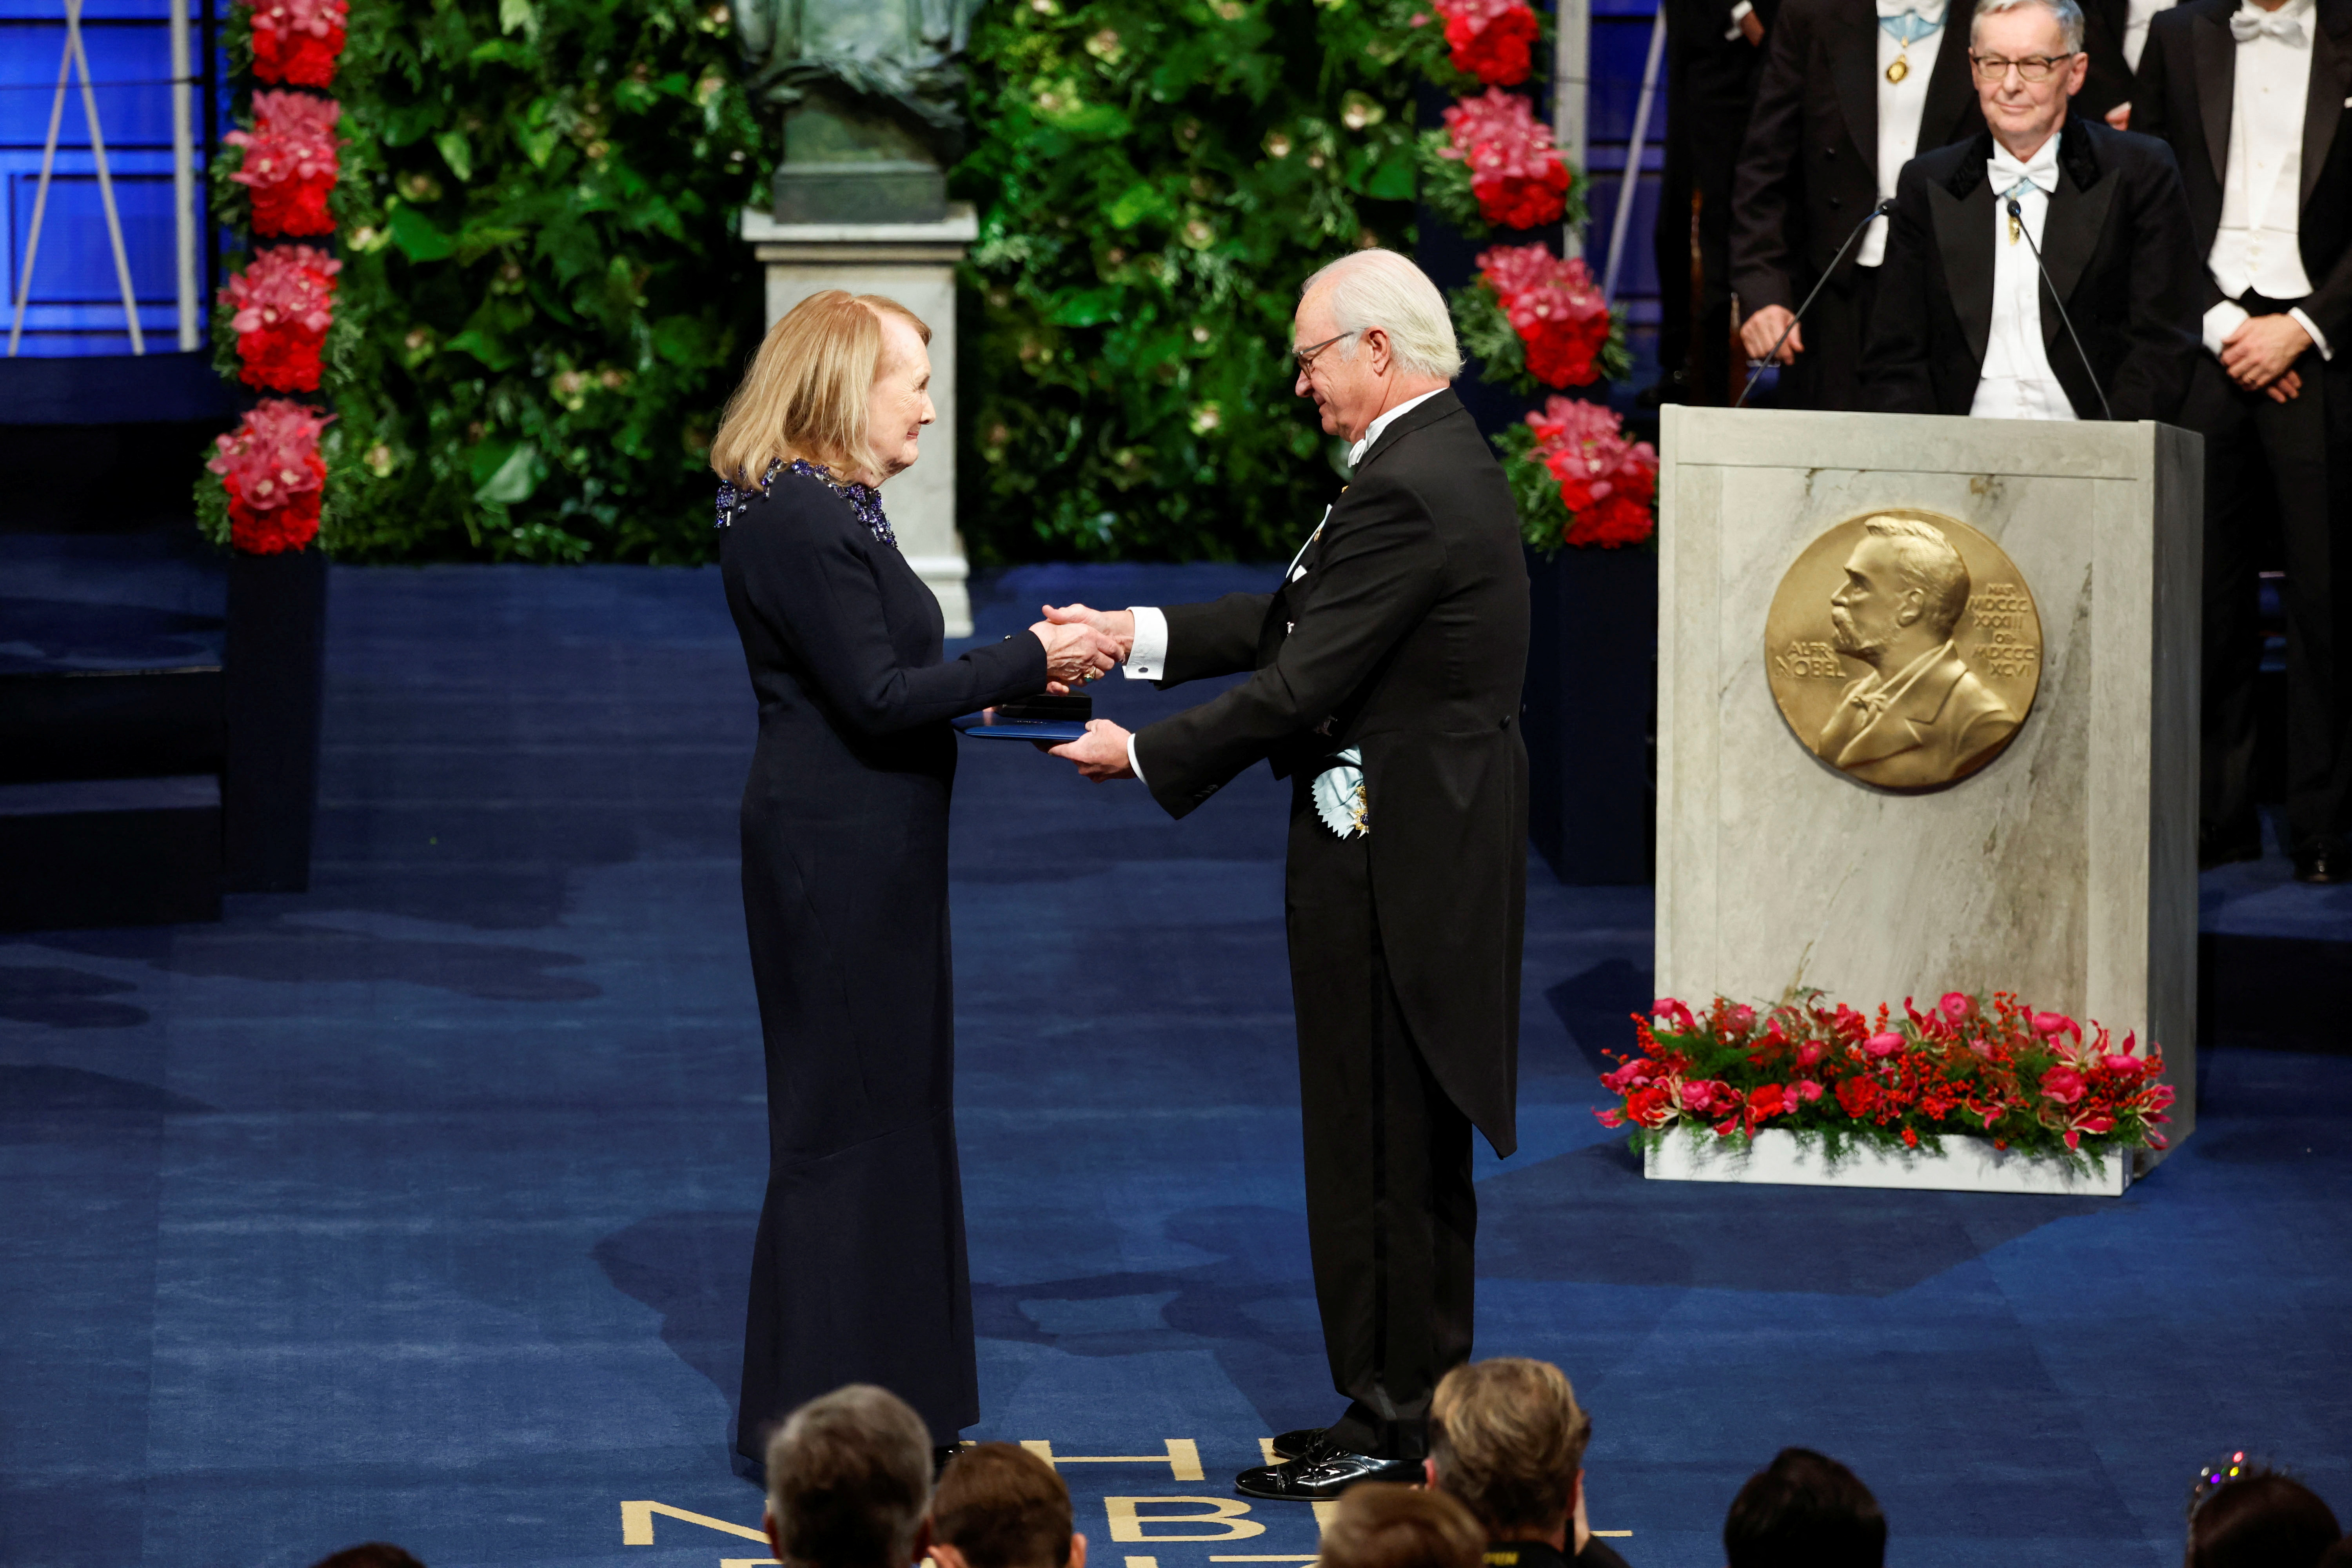 The moment Annie Ernaux received the Nobel Prize for Literature, on December 10, 2022 (Photo: TT News Agency/Christine Olsson via REUTERS)